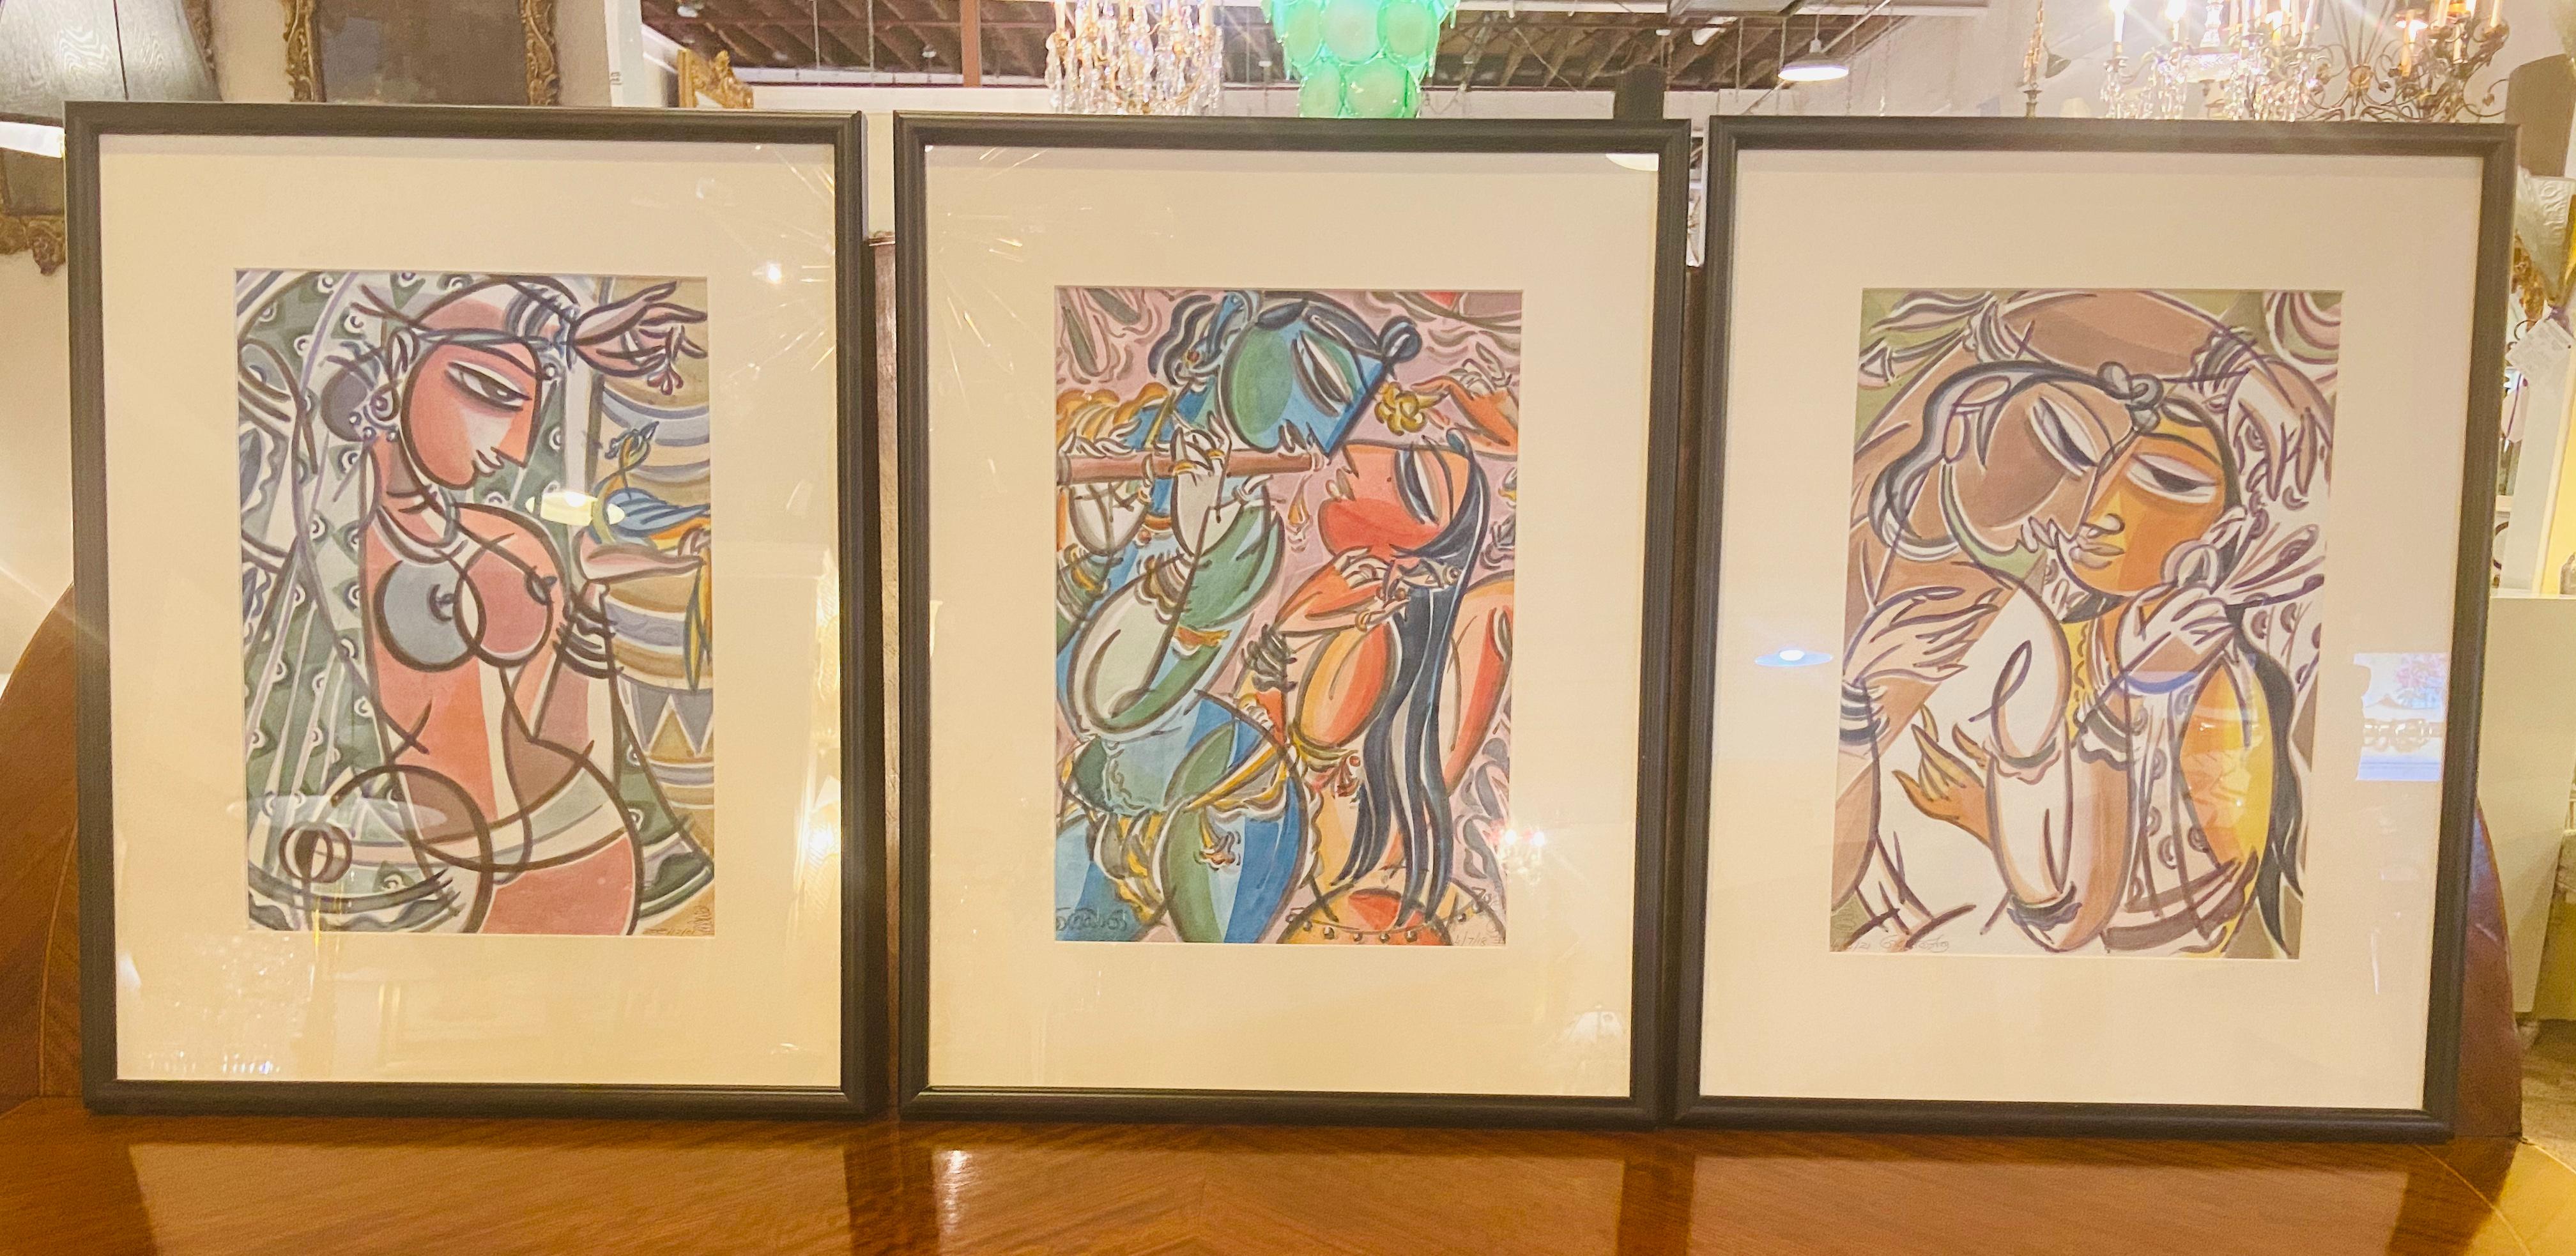 A group of three Picasso style figurative water color paintings depicting a man and a woman with an erotic flair. The paintings are framed and signed.